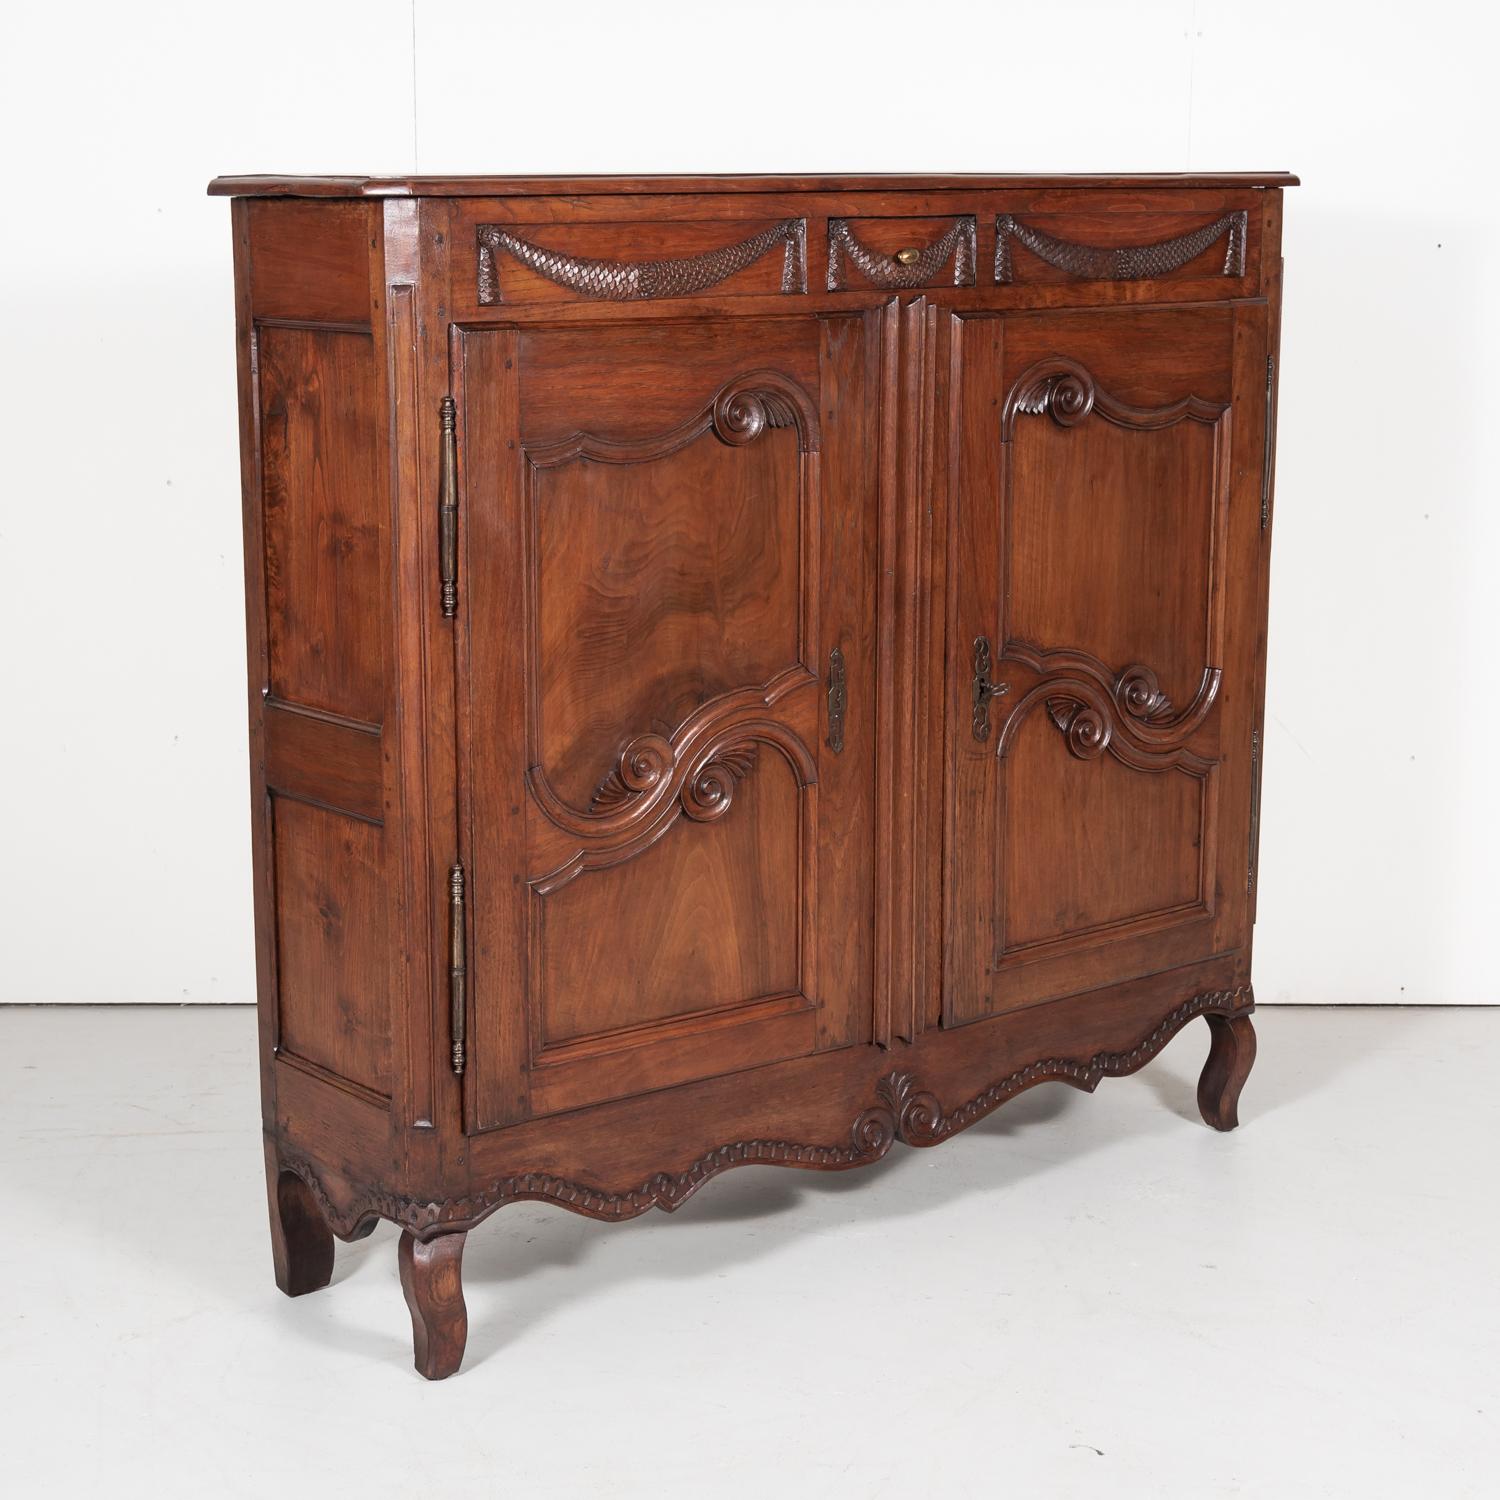 Mid-19th Century 19th Century French Louis XV Style Provençal Cherry Bassette or Small Armoire